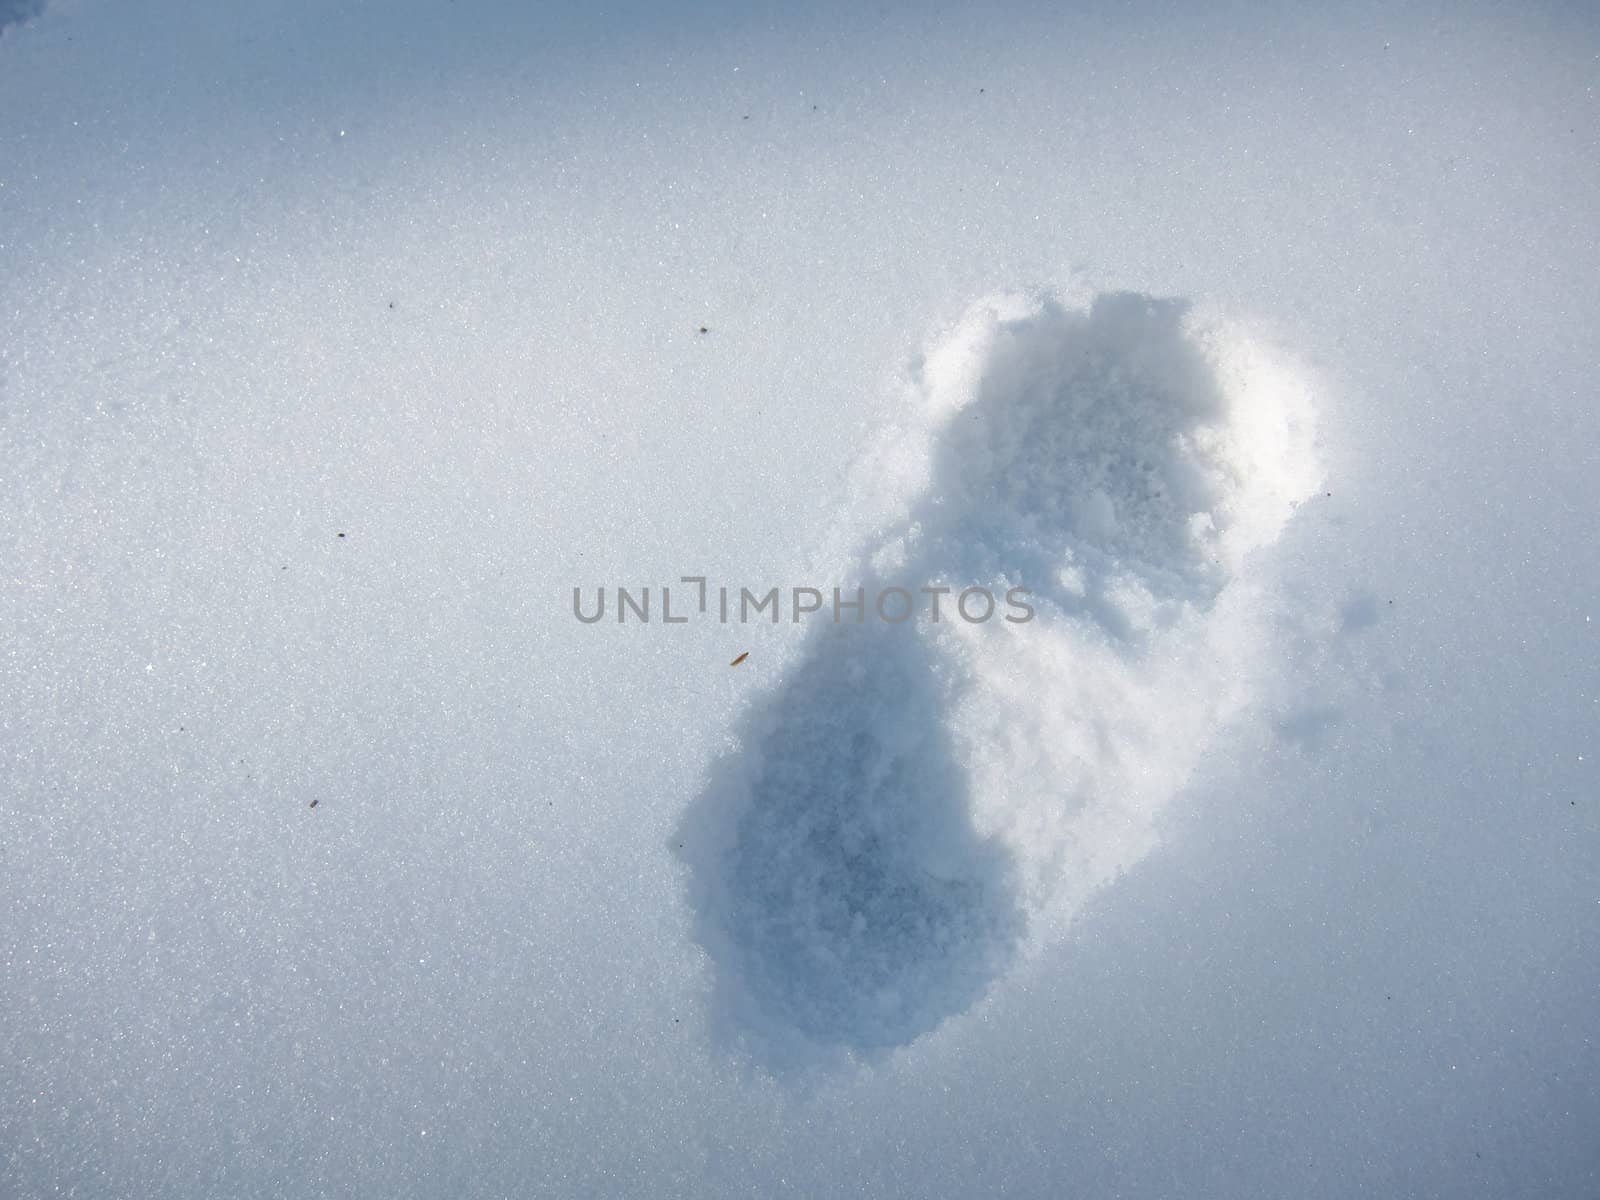 A single bootprint in the snow, outlined by shadows and sunlight.